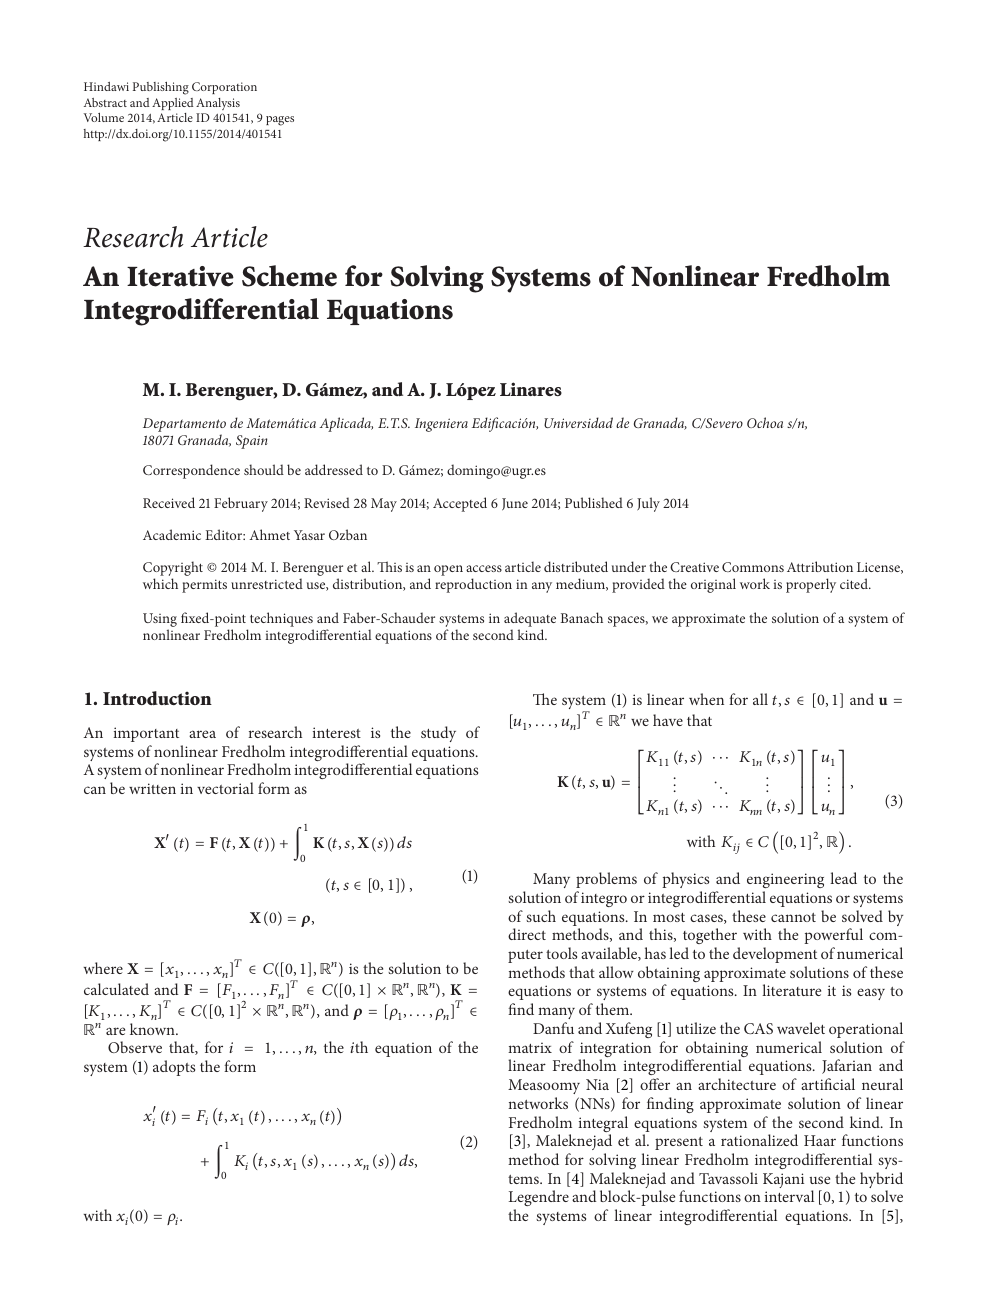 An Iterative Scheme For Solving Systems Of Nonlinear Fredholm Integrodifferential Equations Topic Of Research Paper In Mathematics Download Scholarly Article Pdf And Read For Free On Cyberleninka Open Science Hub